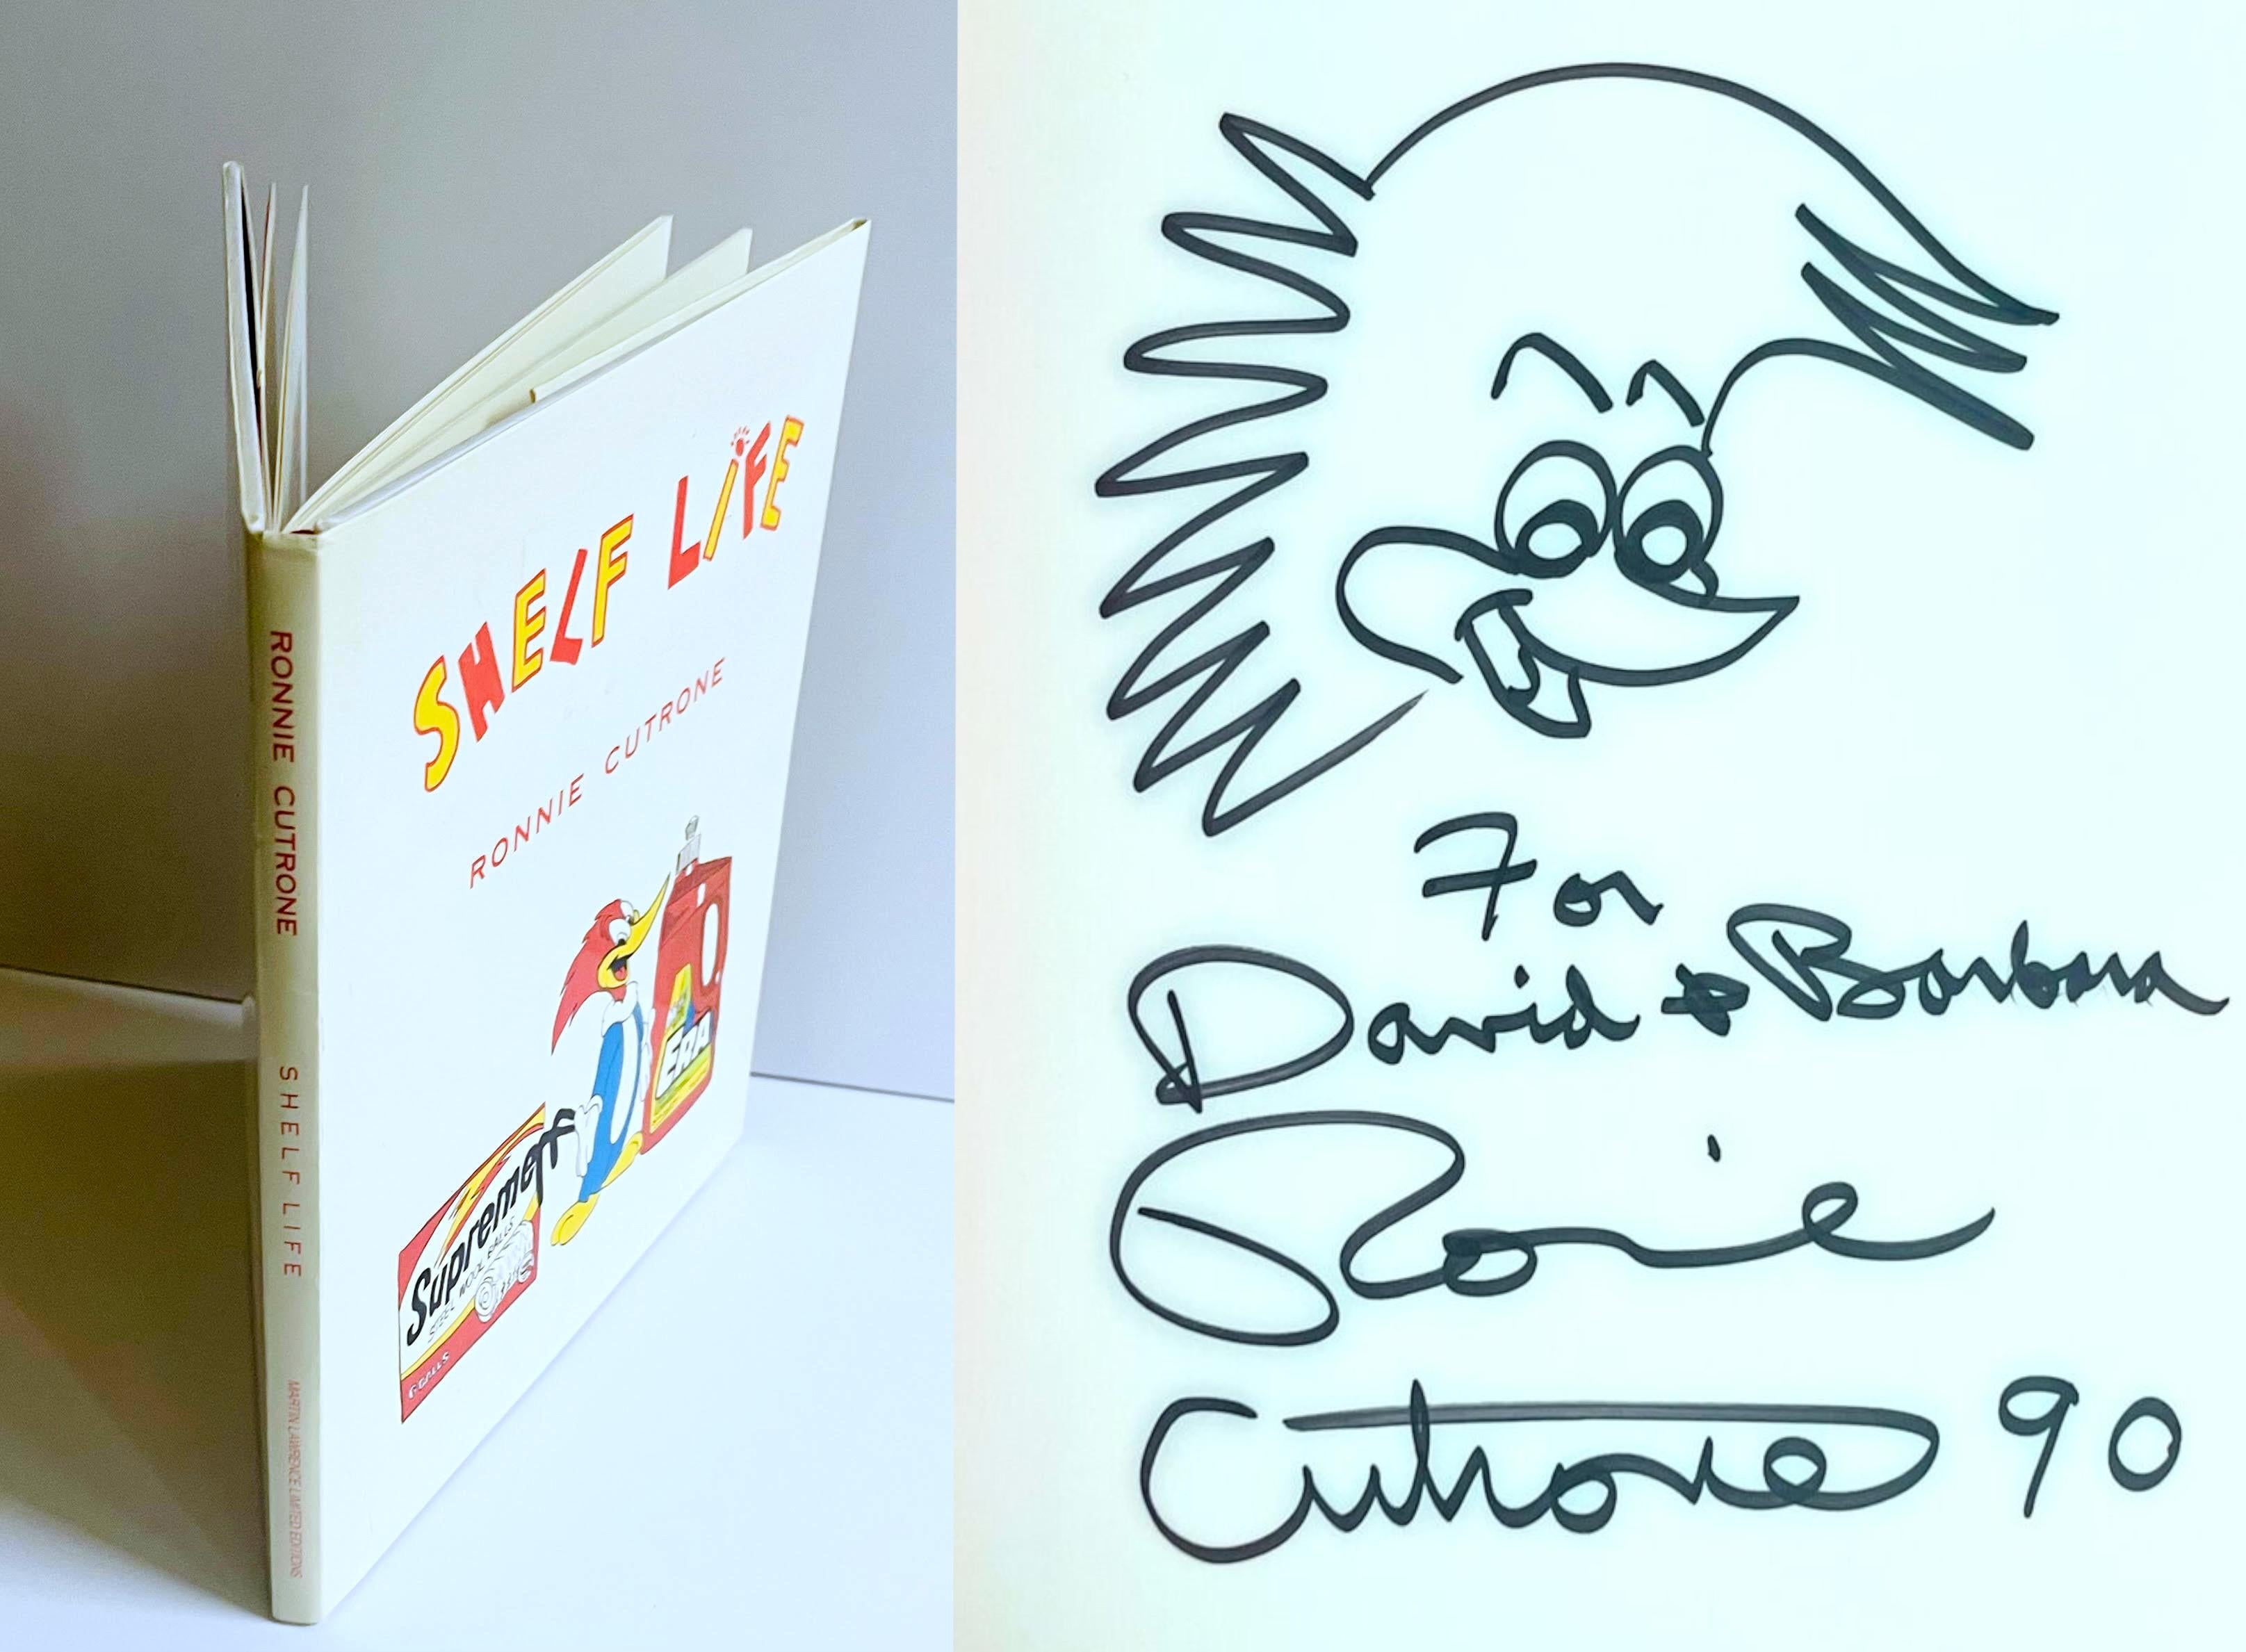 Ronnie Cutrone
Original bird drawing (hand signed and inscribed by Ronnie Cutrone), 1990
Original signed drawing done in marker held in hardback monograph with dust jacket
Boldly signed, dated and inscribed by Ronnie Cutrone on the first front end